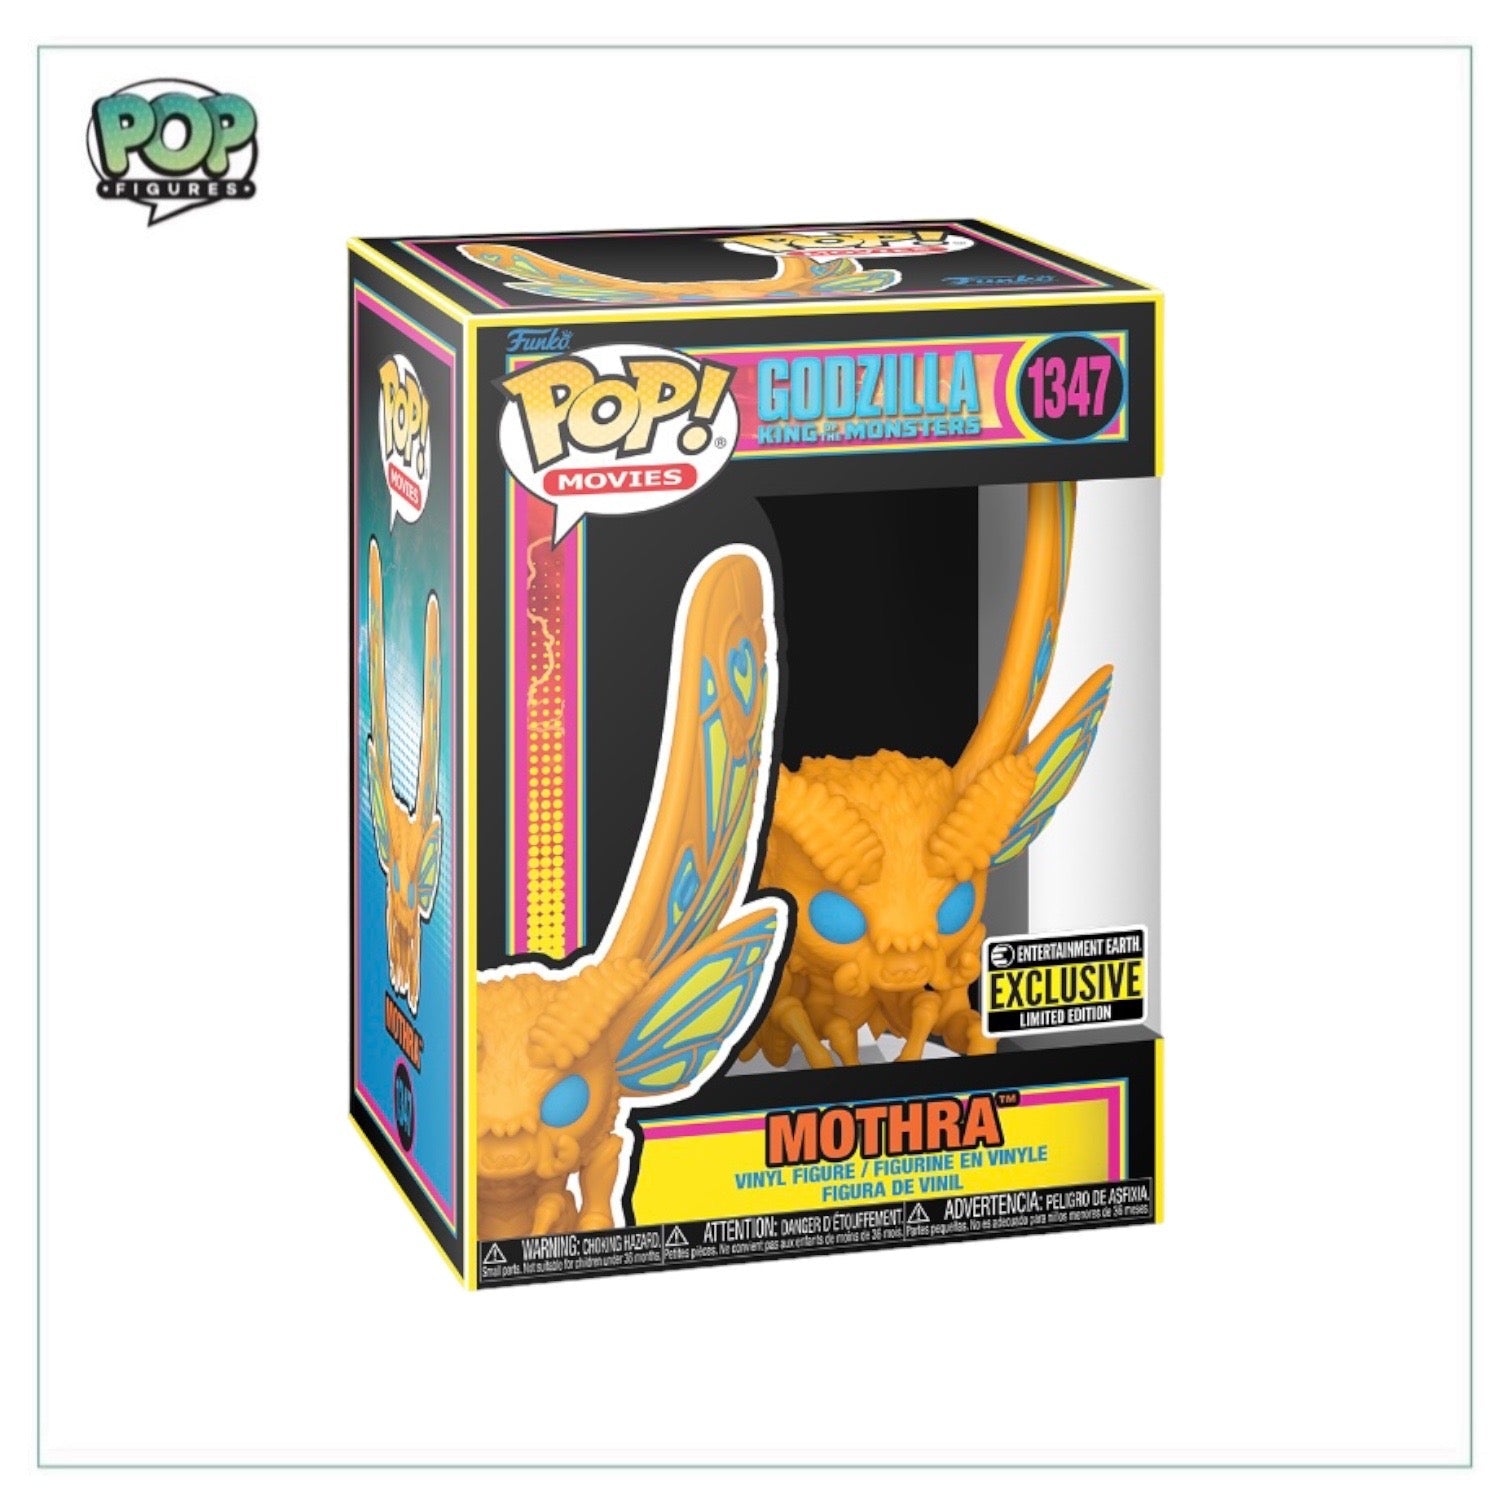 Mothra #1347 (Blacklight) Funko Pop! - Godzilla King of the Monsters - Entertainment Earth Exclusive - Angry Cat